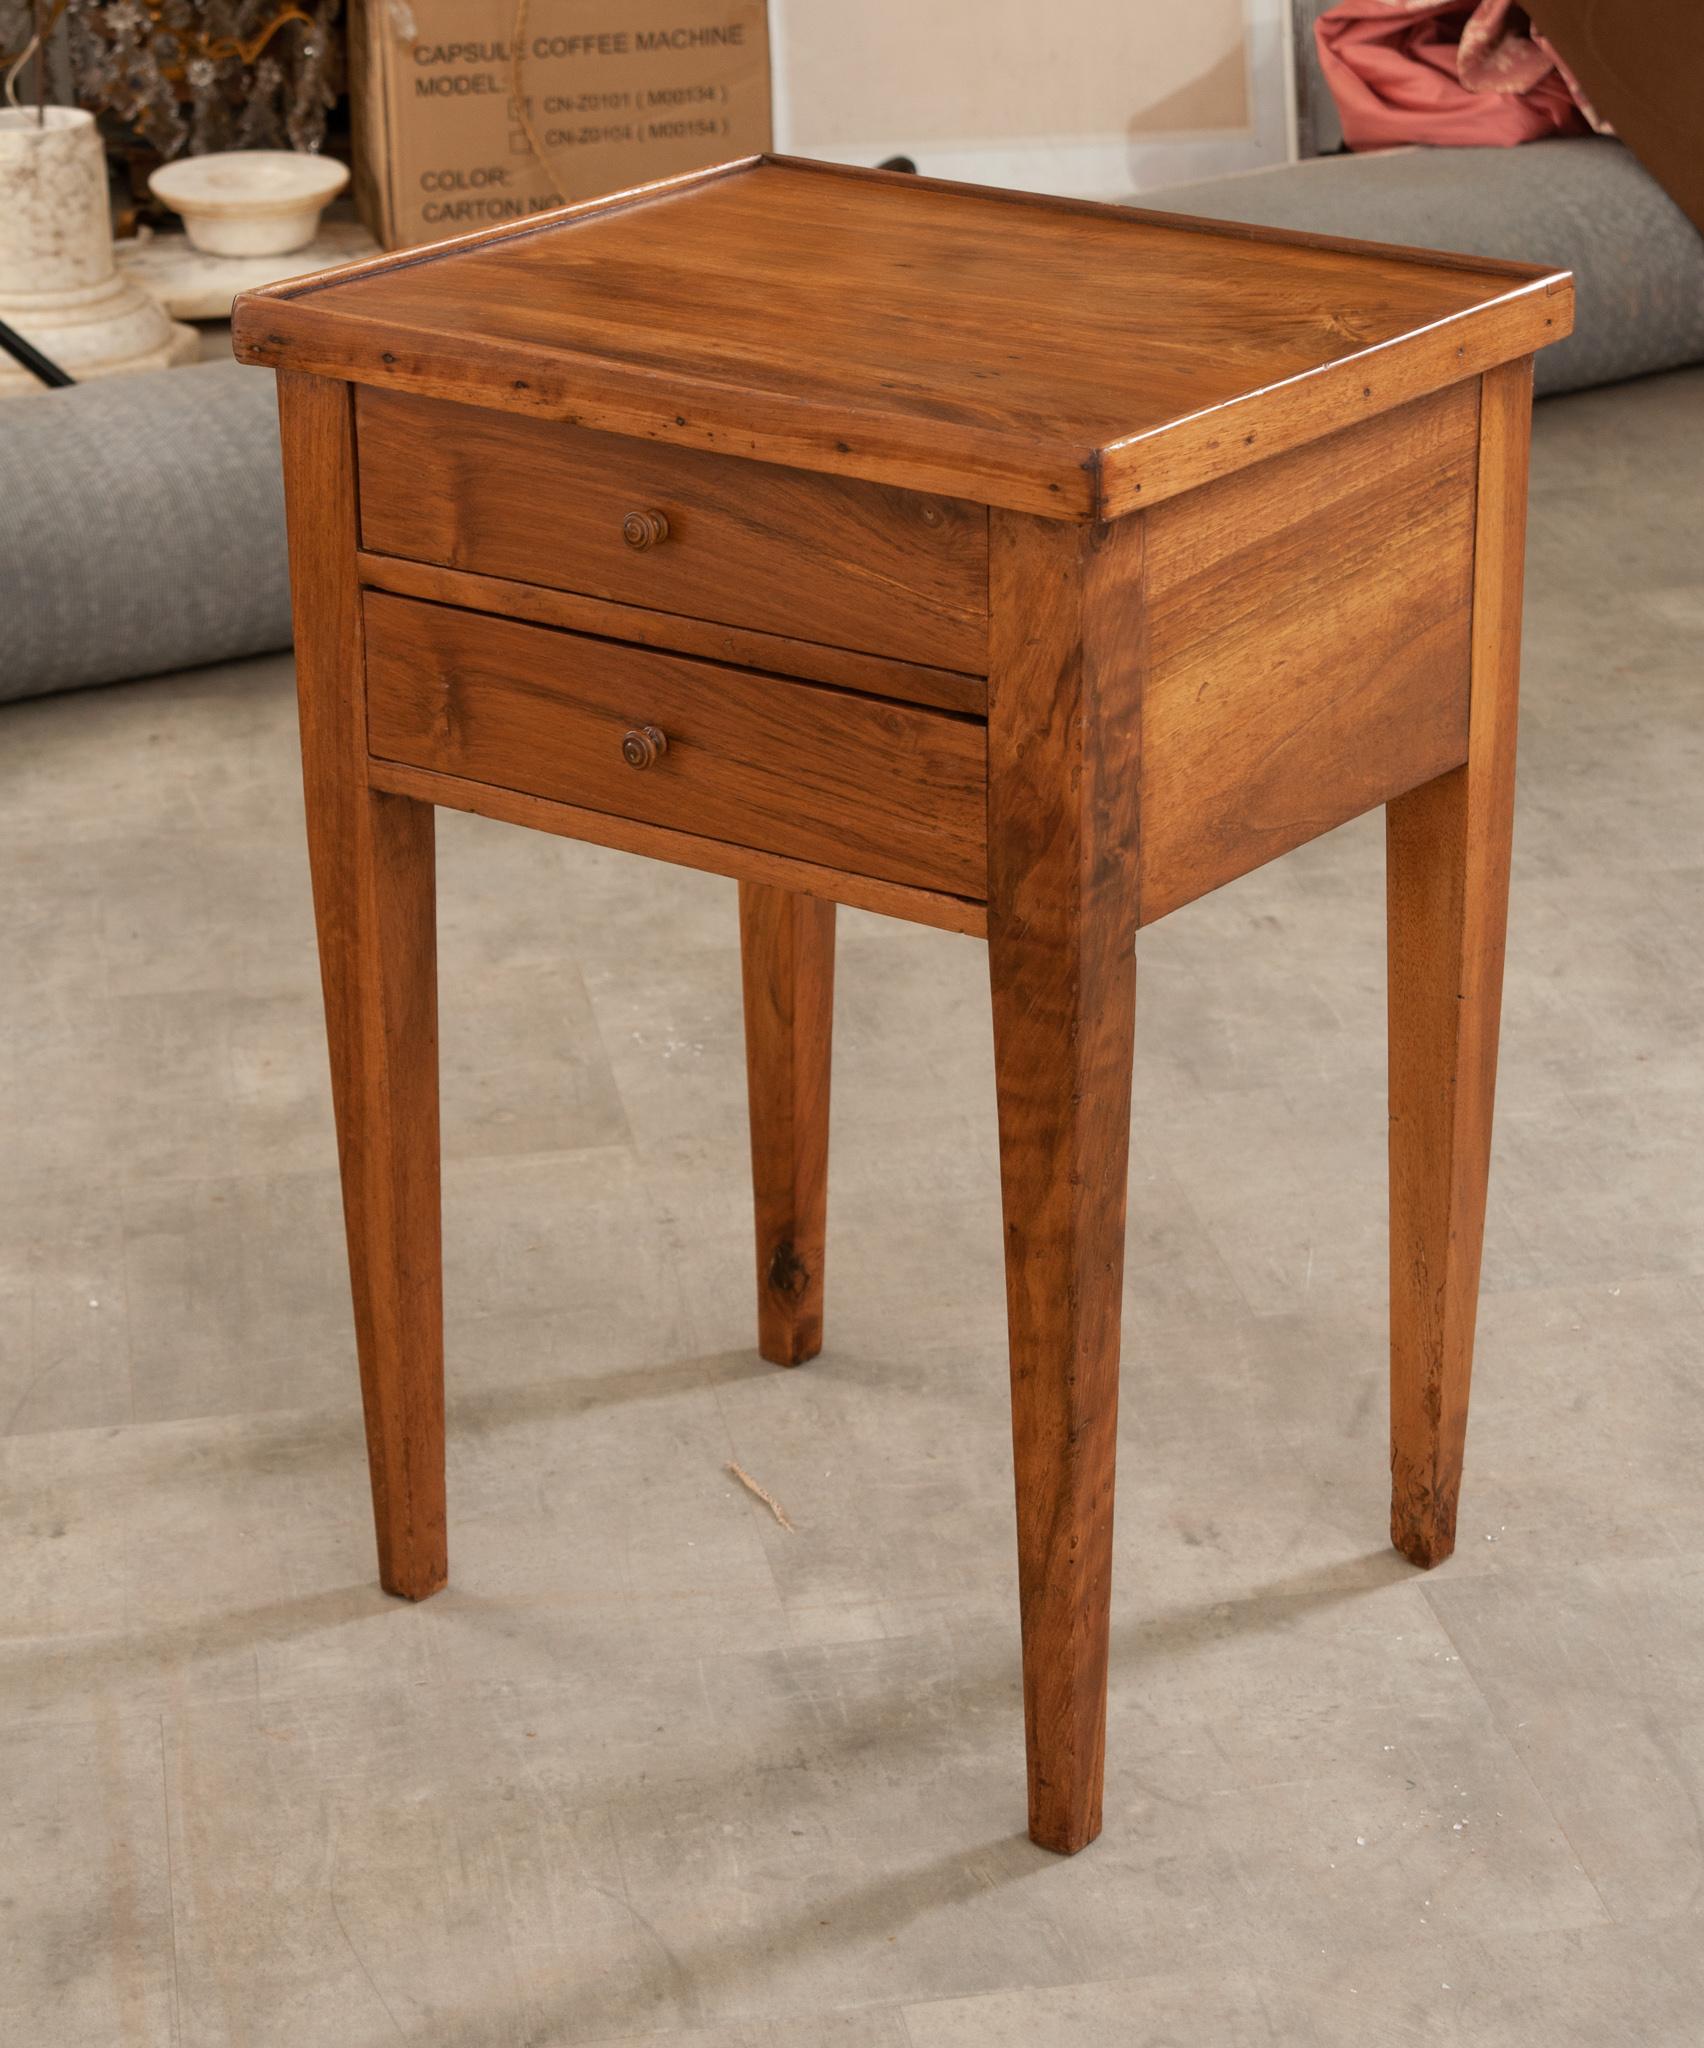 A mid 19th Century bedside table, handmade in France. This table is constructed from solid walnut and features a smooth walnut top above two drawers with tapered legs. Gorgeous graining and patina are found throughout this solid wood table. Cleaned